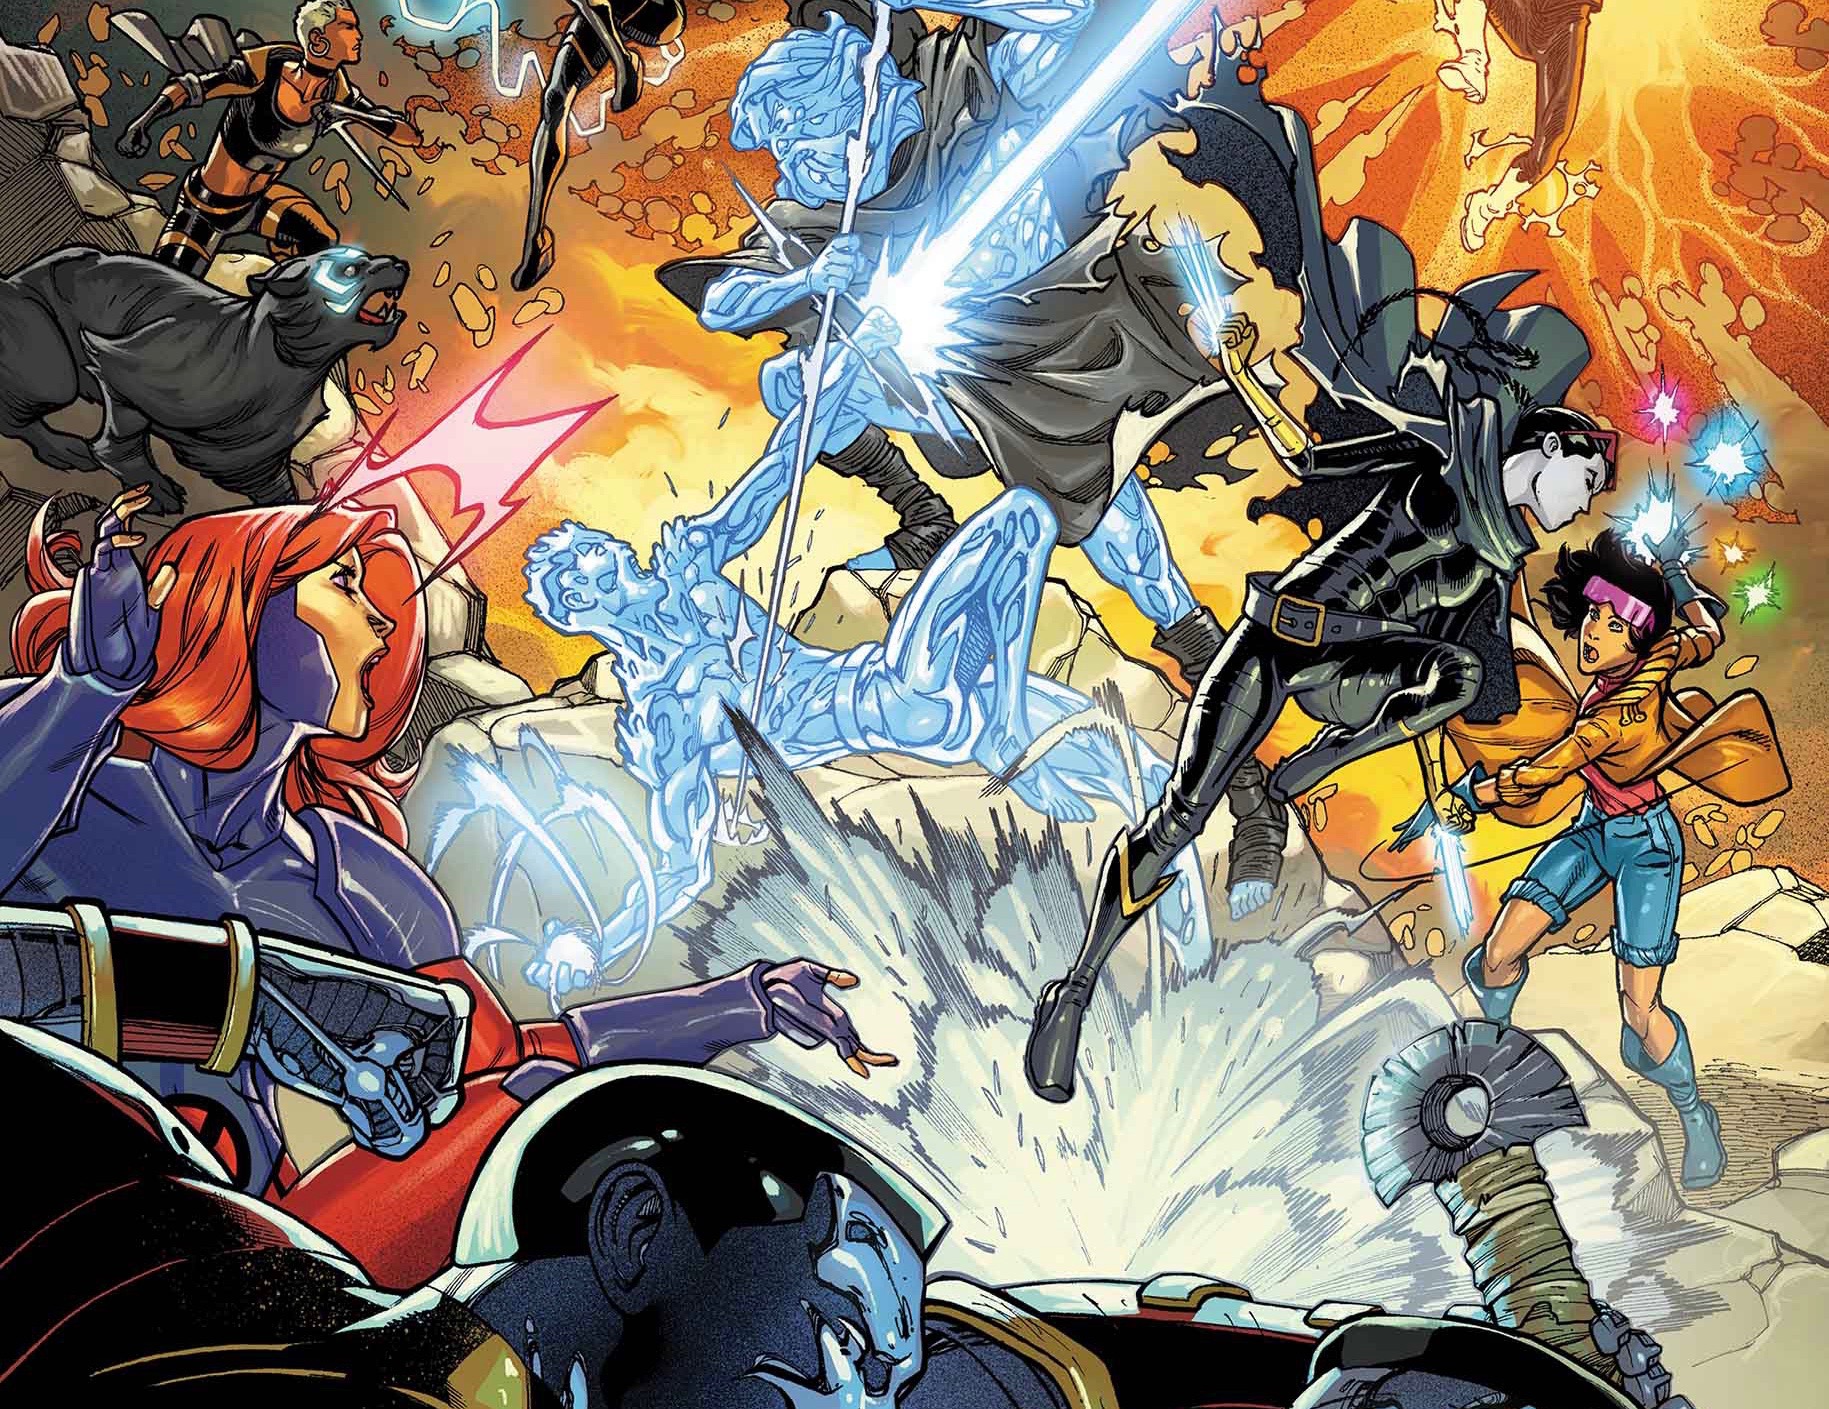 Return of the Ice Master: Sina Grace on what fans can expect from Uncanny X-Men: Winter's End #1